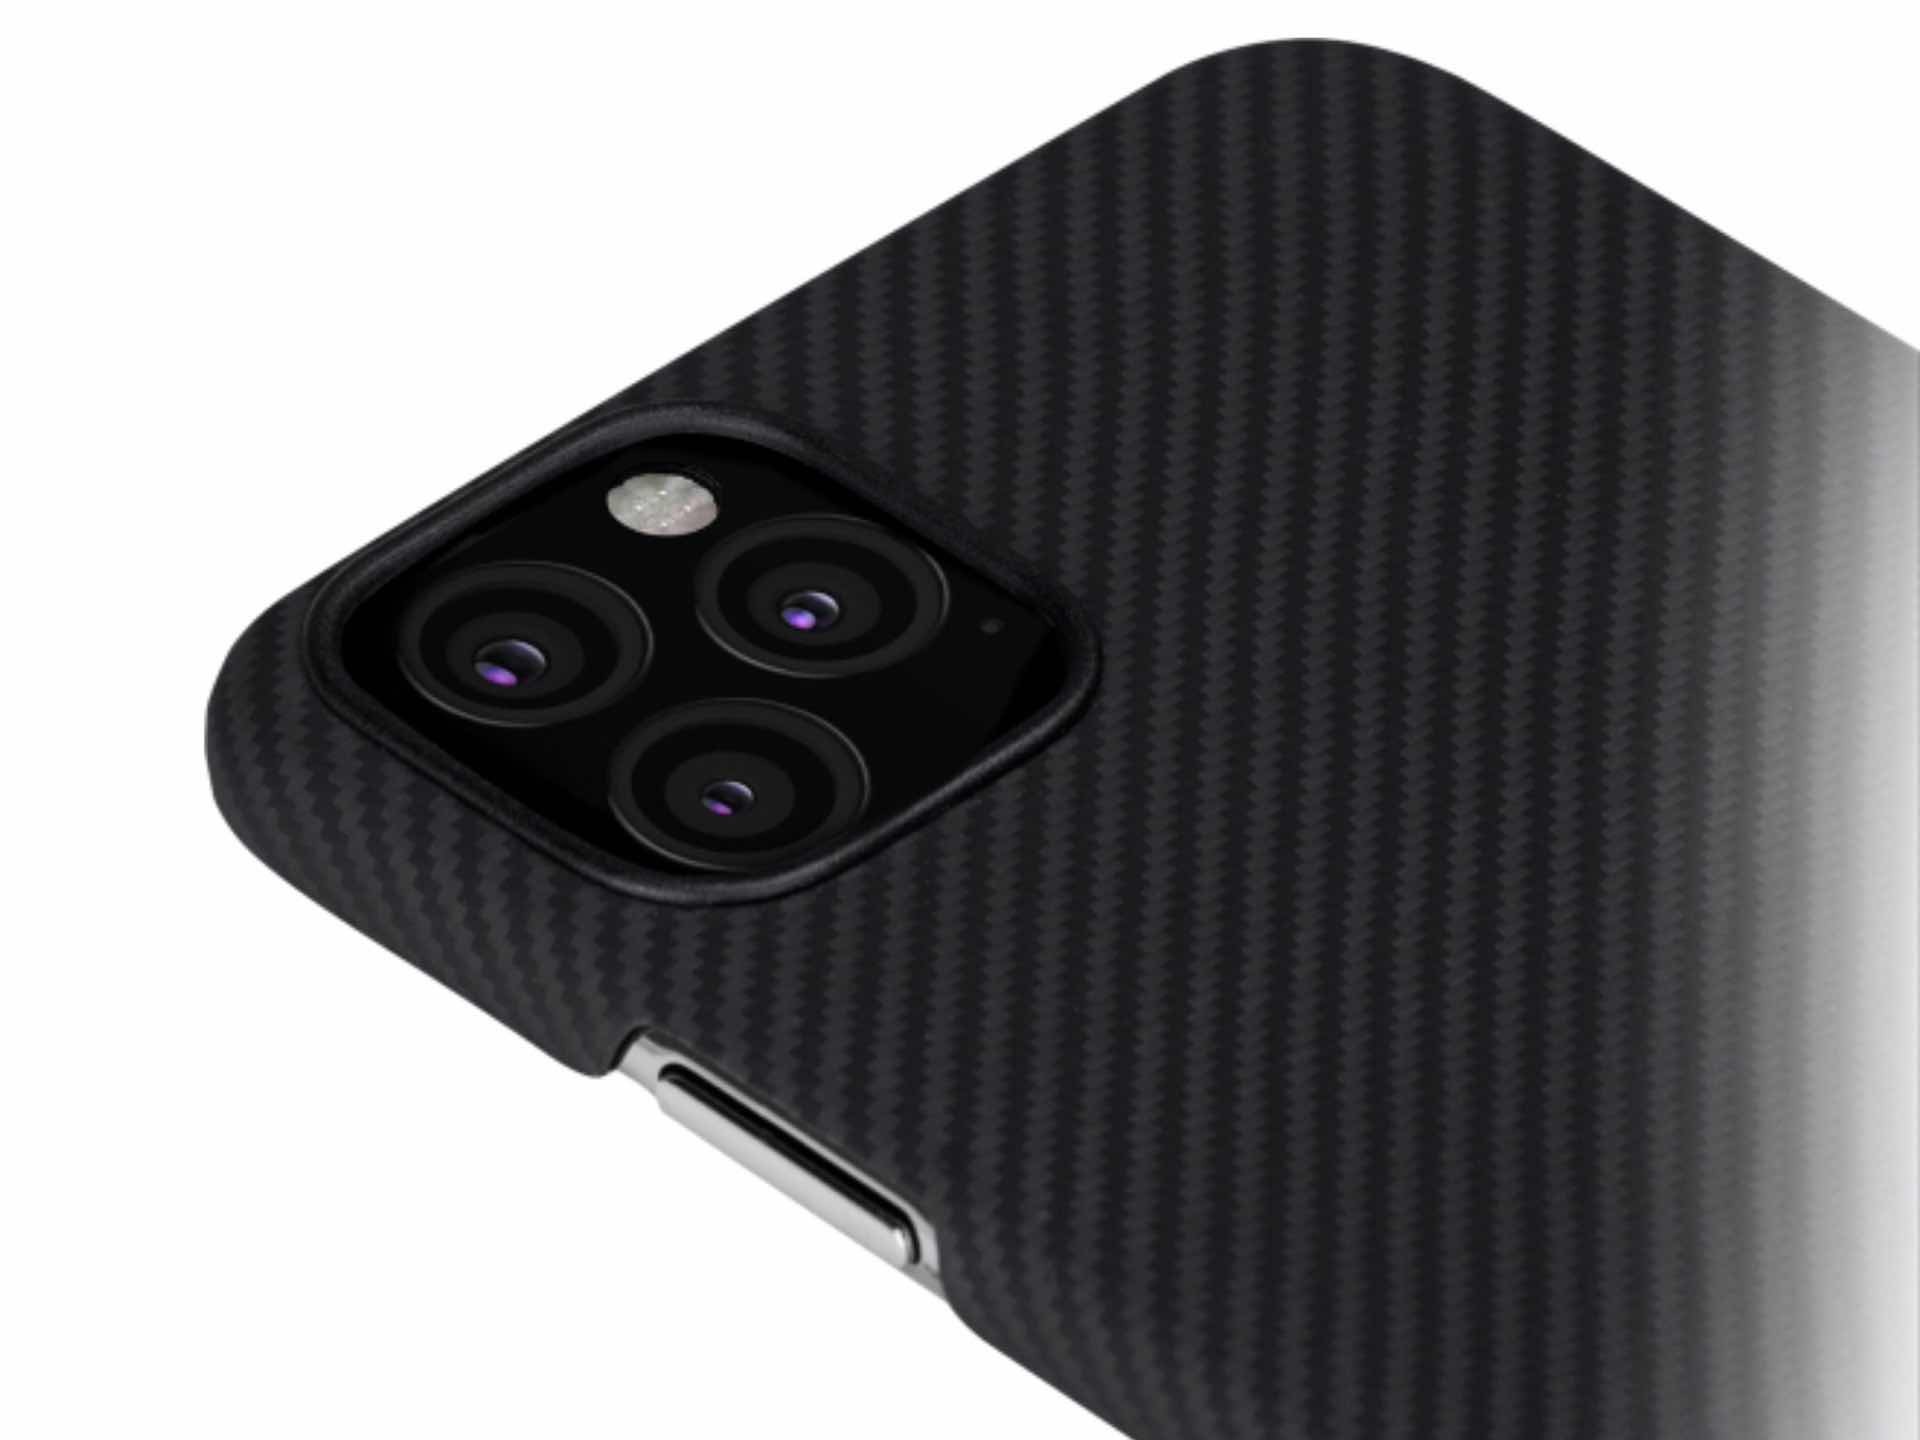 PITAKA Air Case for iPhone 11/Pro/Max